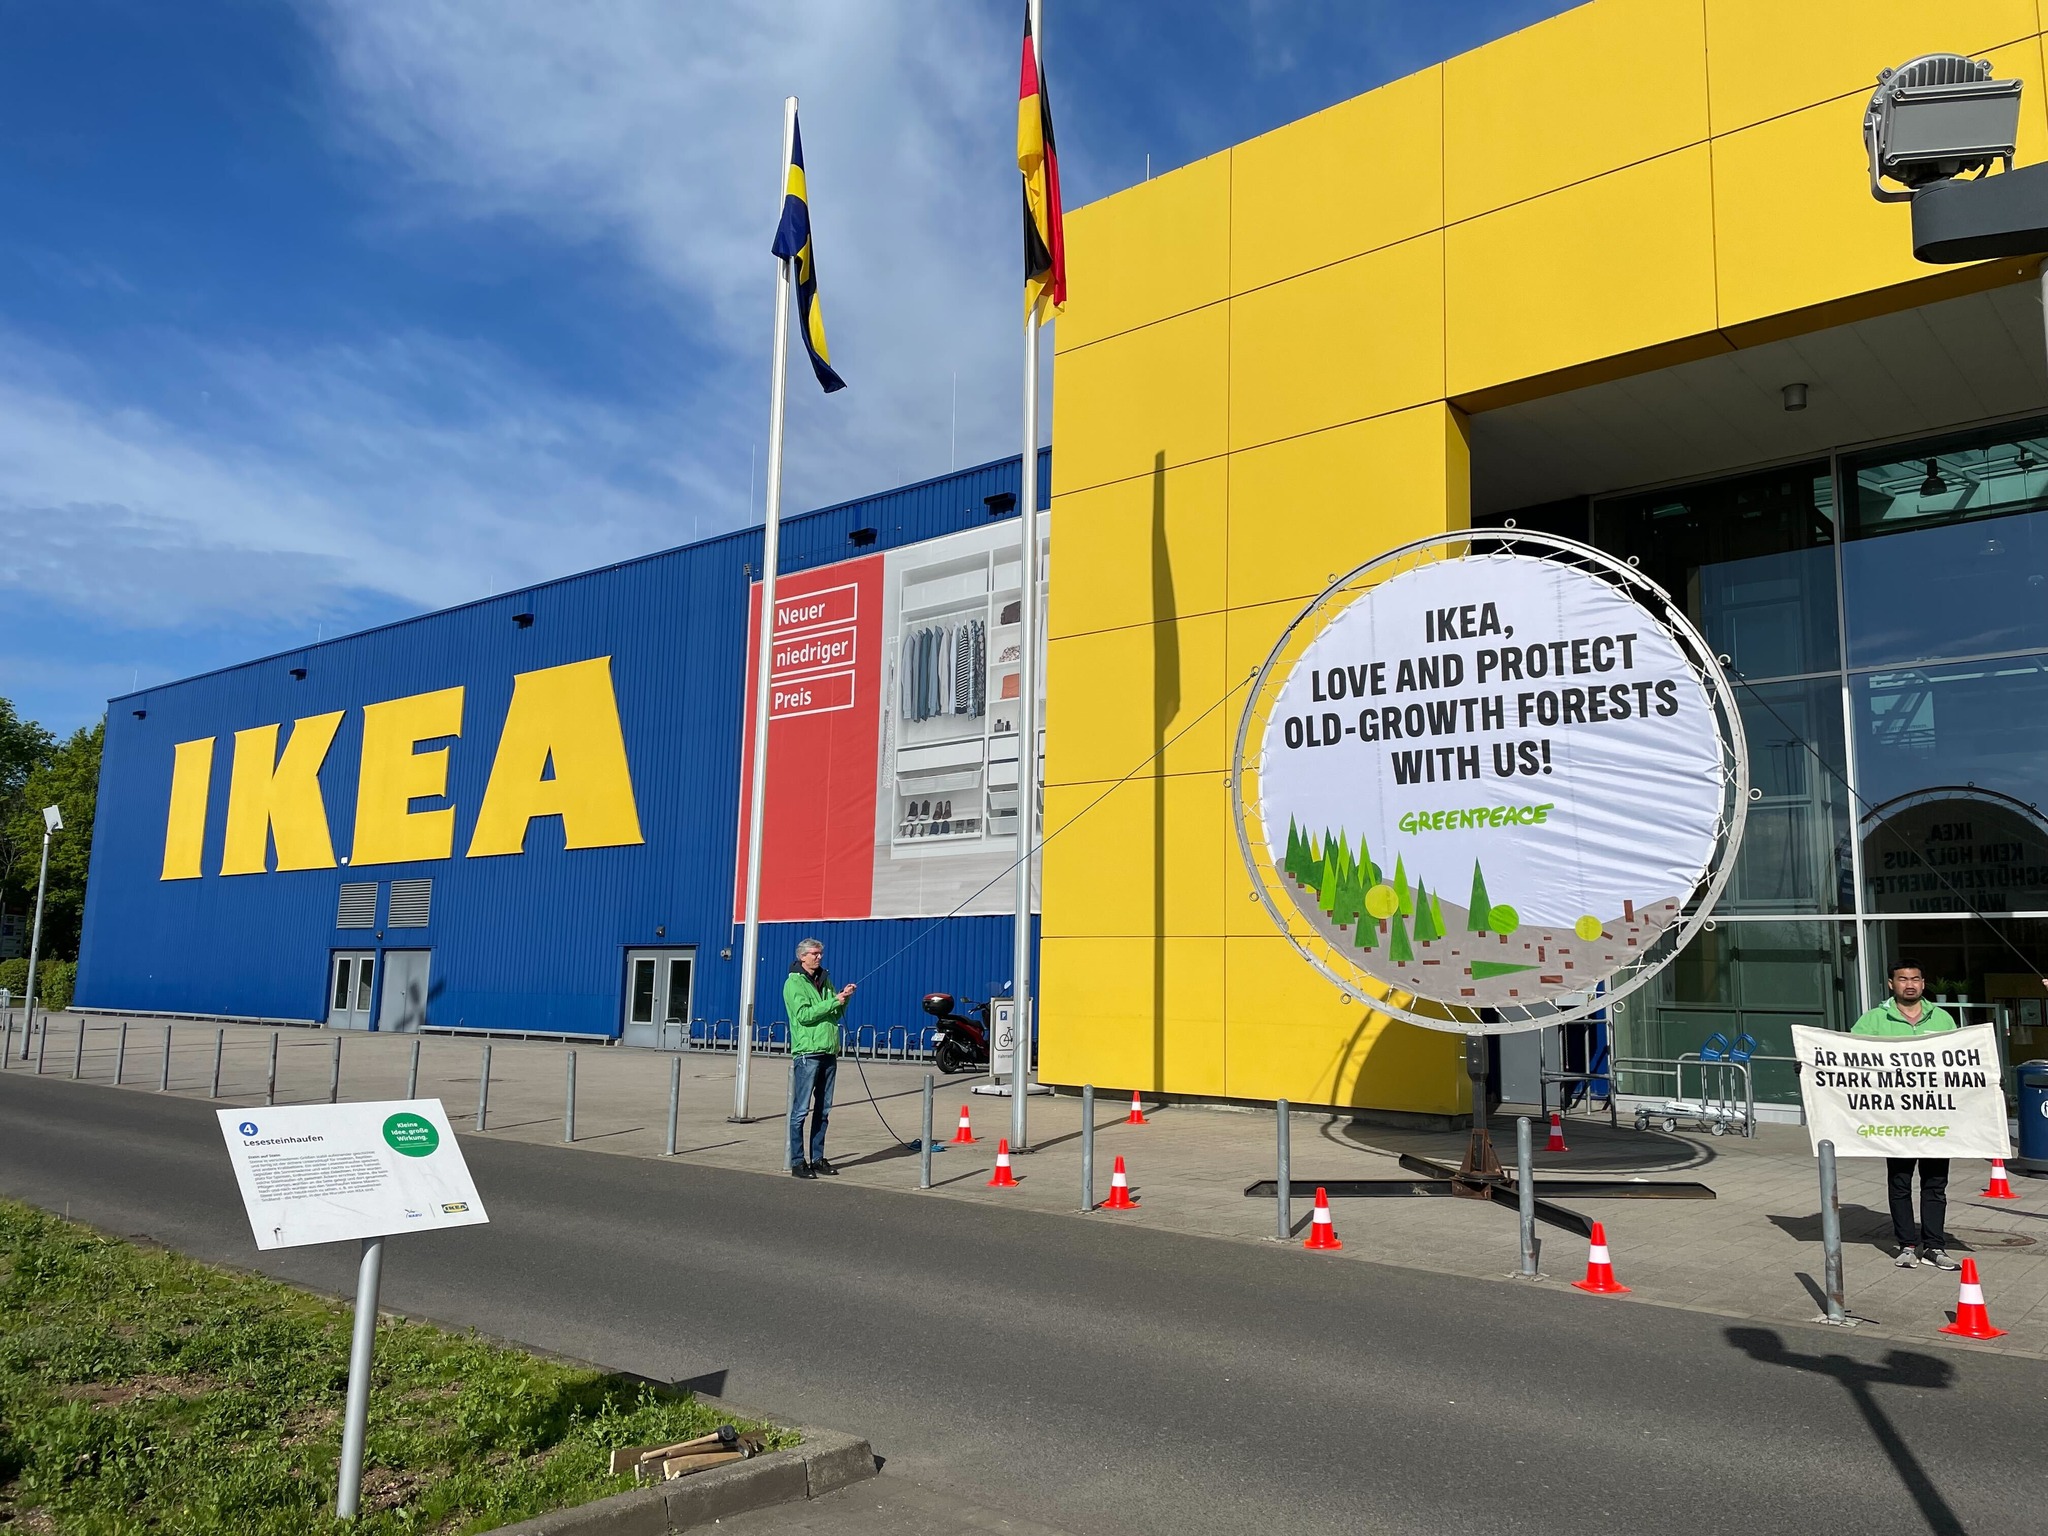 IKEA sourcing wood from old-growth Romanian forests, Greenpeace report says